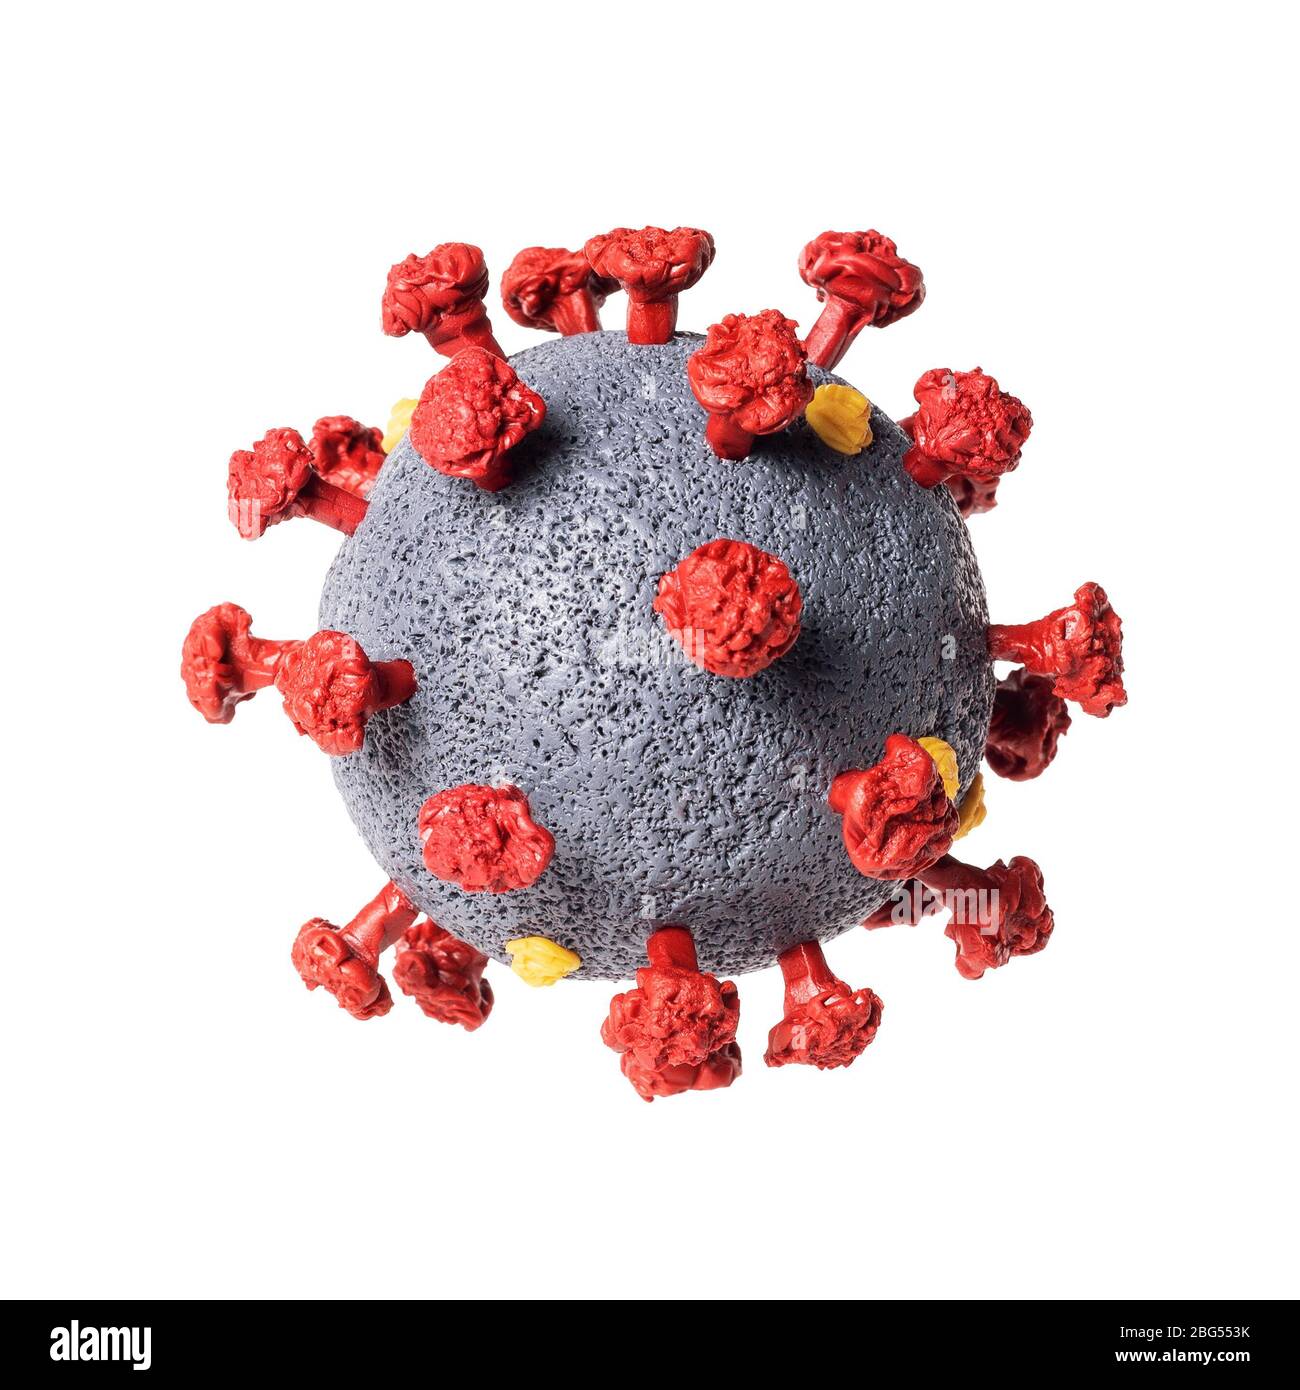 Close-up of the SARS-CoV-2 coronavirus model. Isolate on white background. The causative agent of the disease COVID-19 Stock Photo